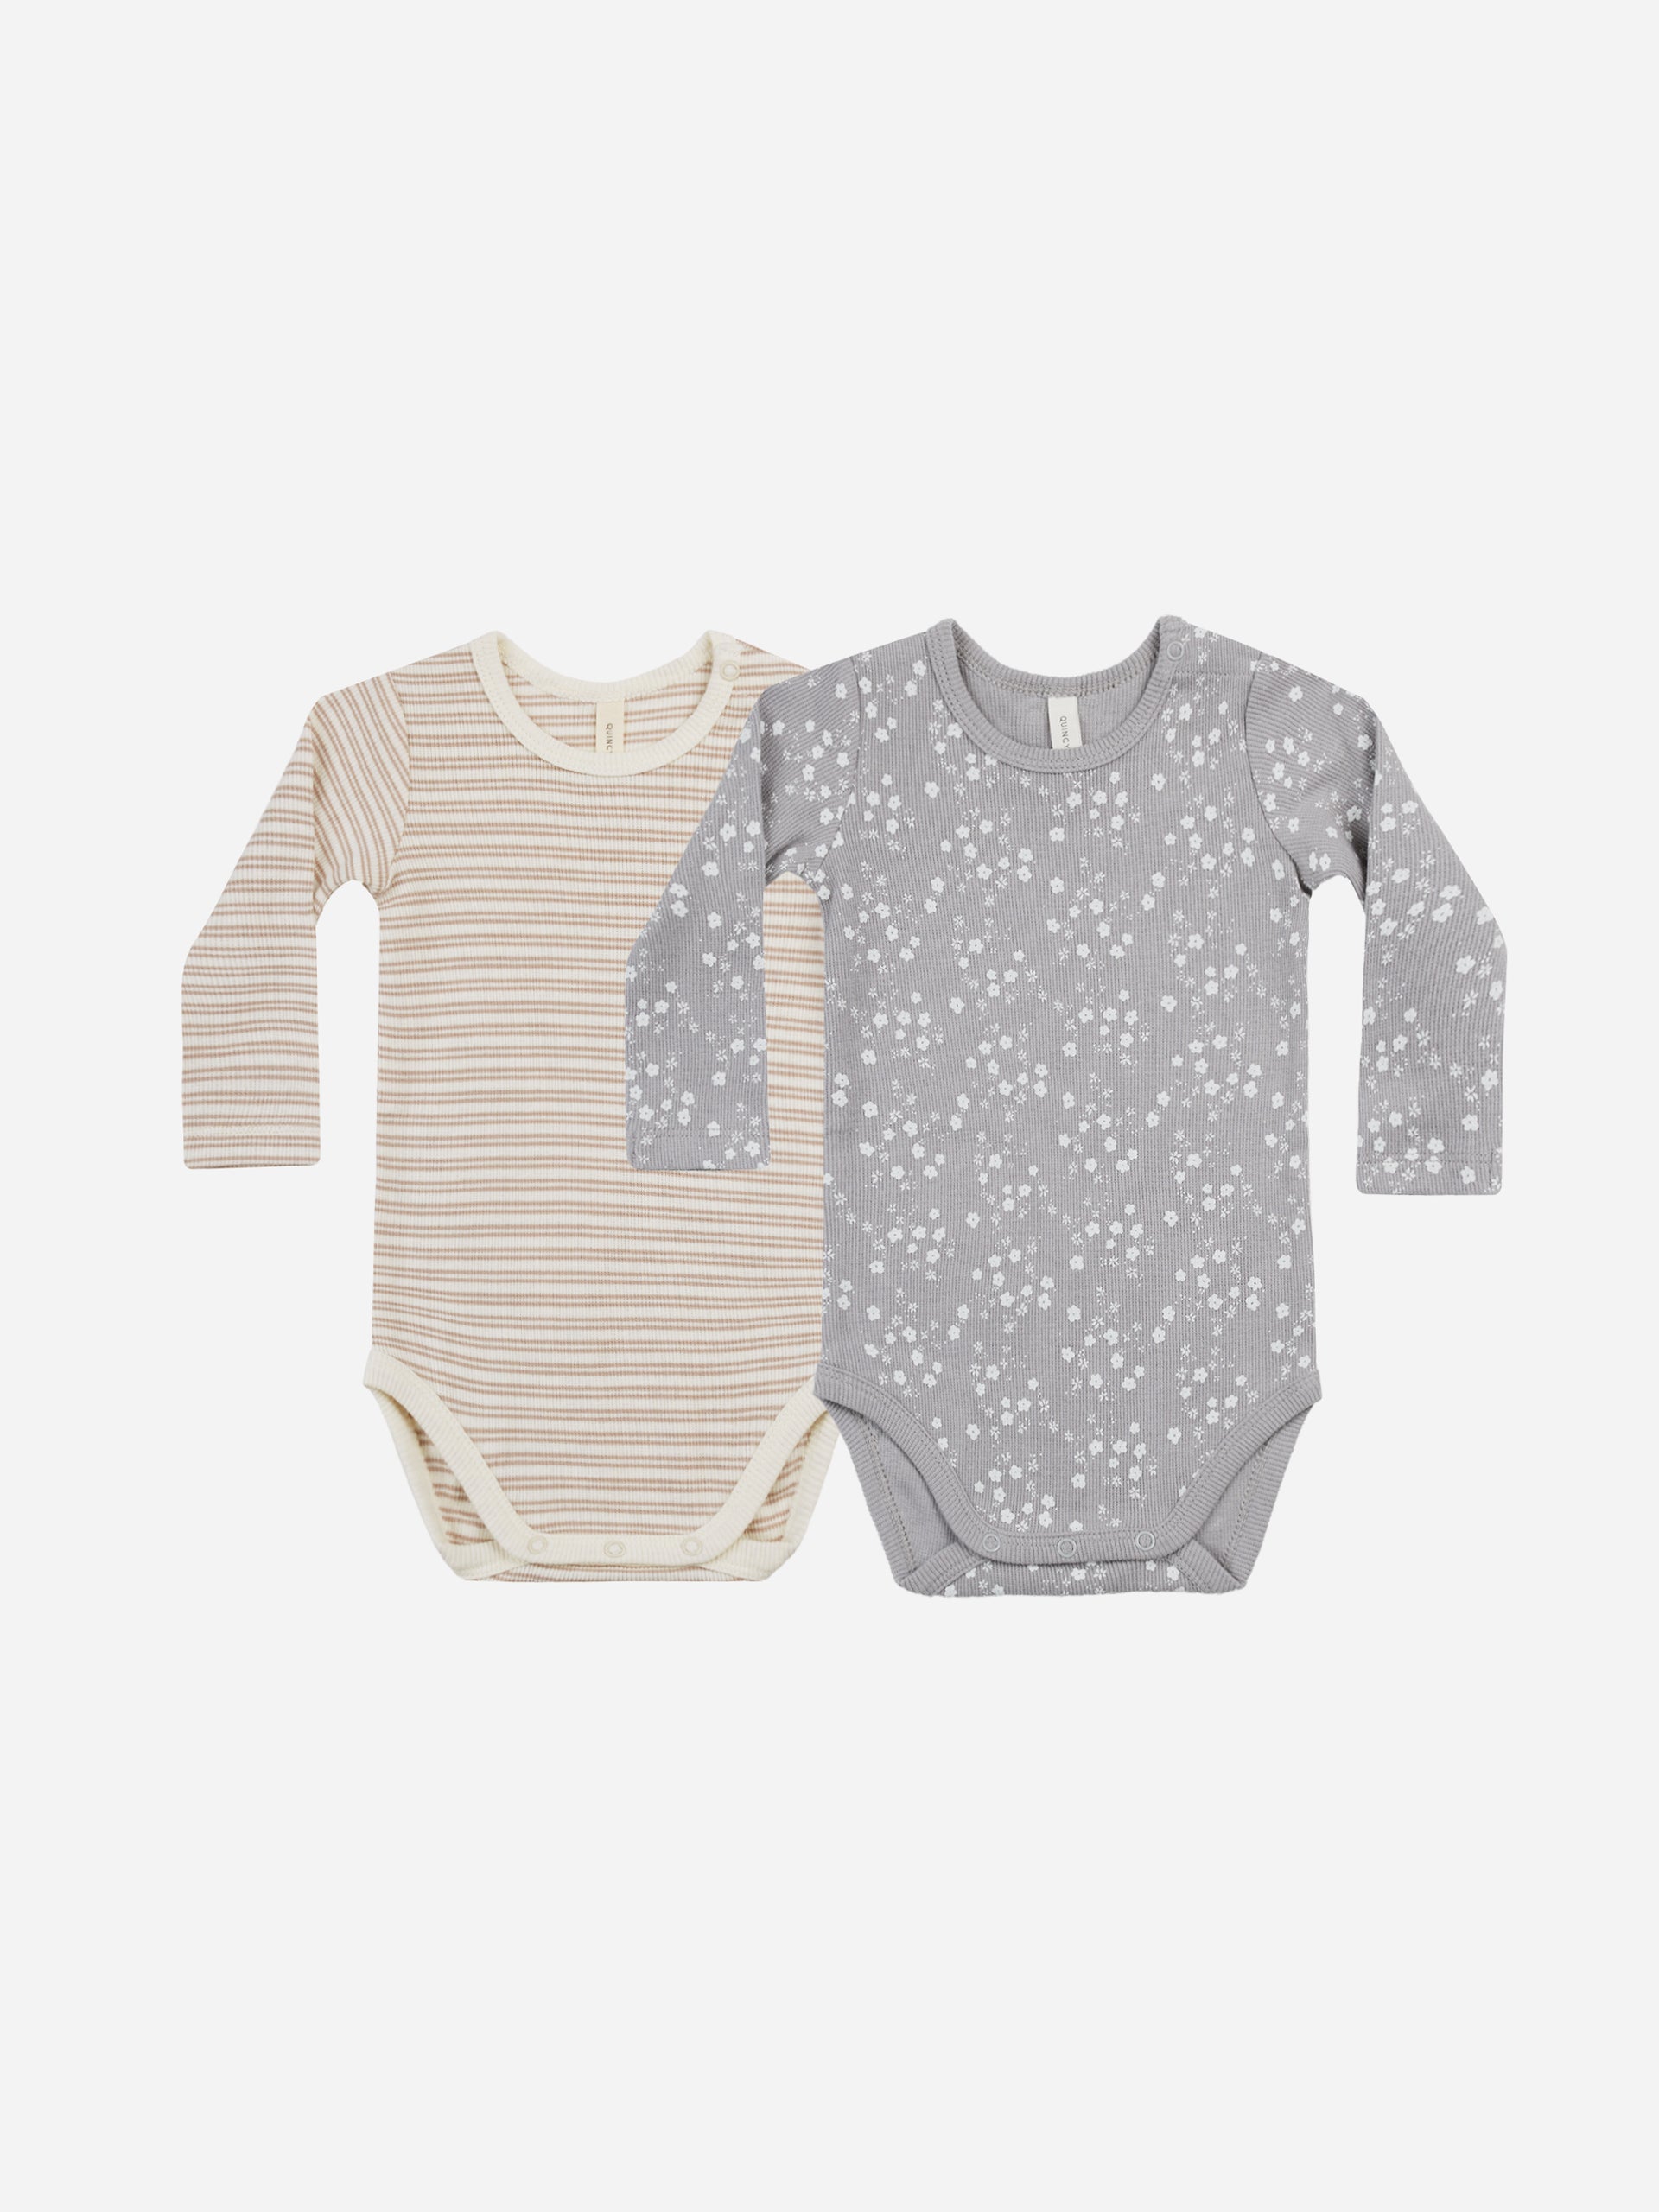 Ribbed Bodysuit, 2 Pack || Fleur, Oat Stripe - Rylee + Cru | Kids Clothes | Trendy Baby Clothes | Modern Infant Outfits |